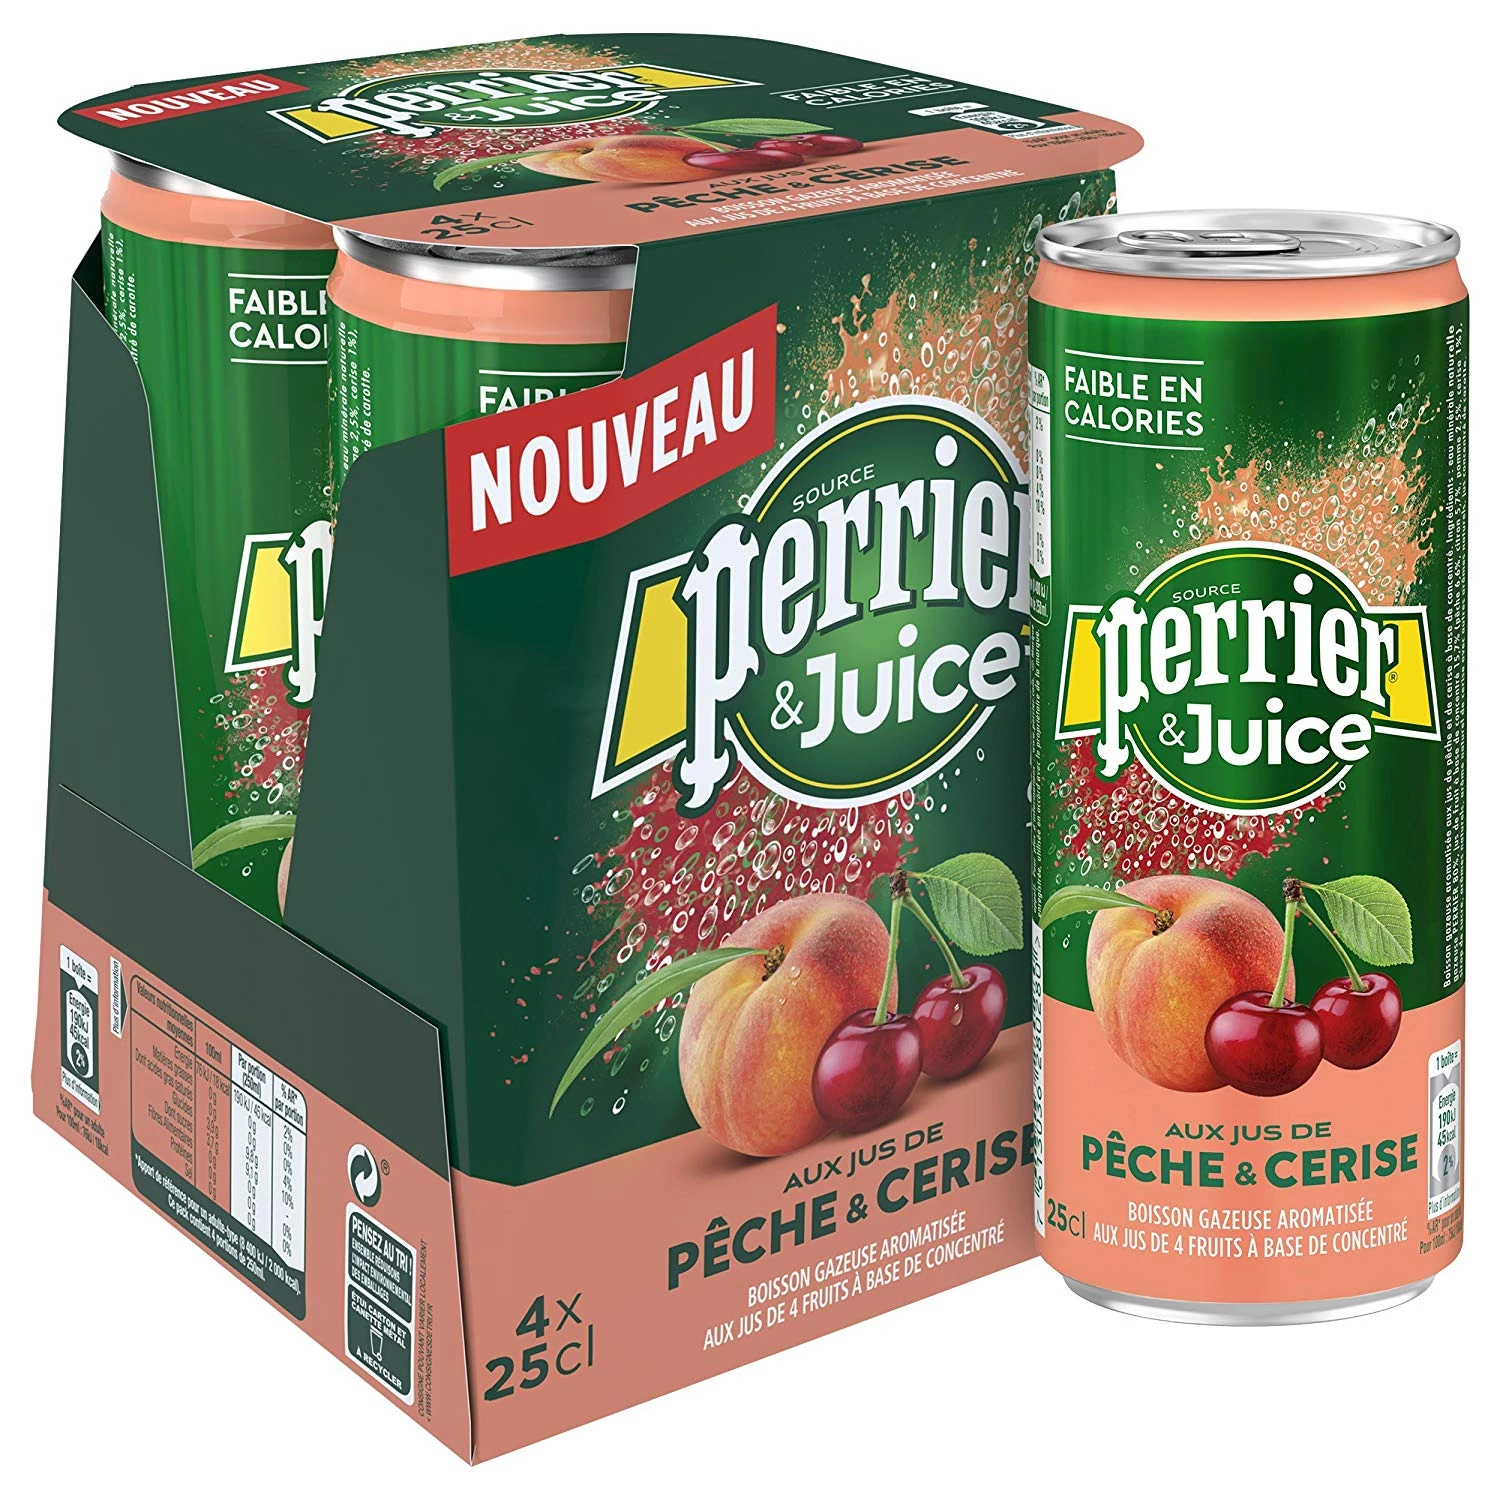 Peach-cherry flavored sparkling water 4x25cl - PERRIER & JUICY